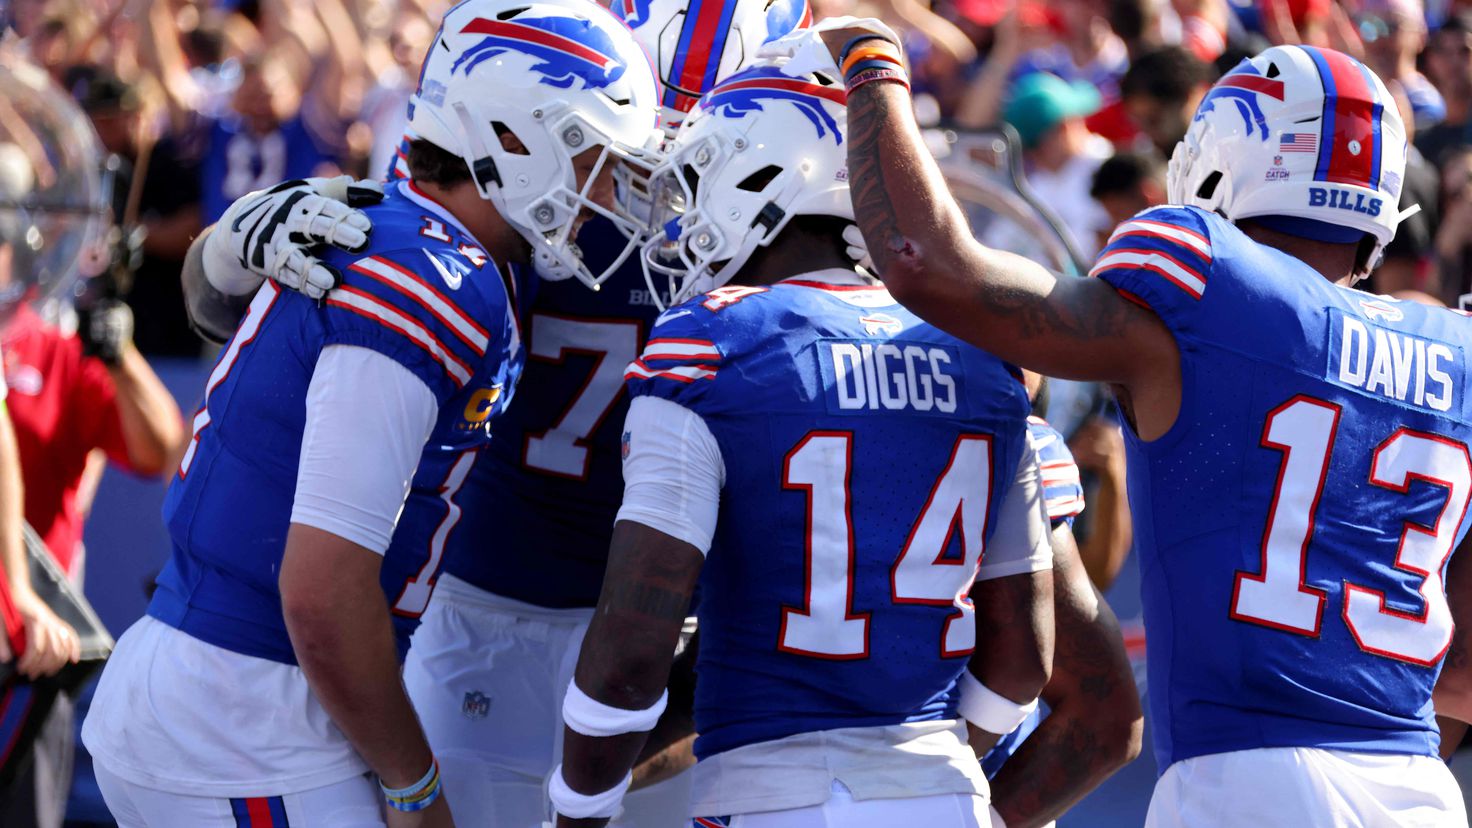 Dolphins 20 vs 48 Bills sumamry, stats, score and highlights